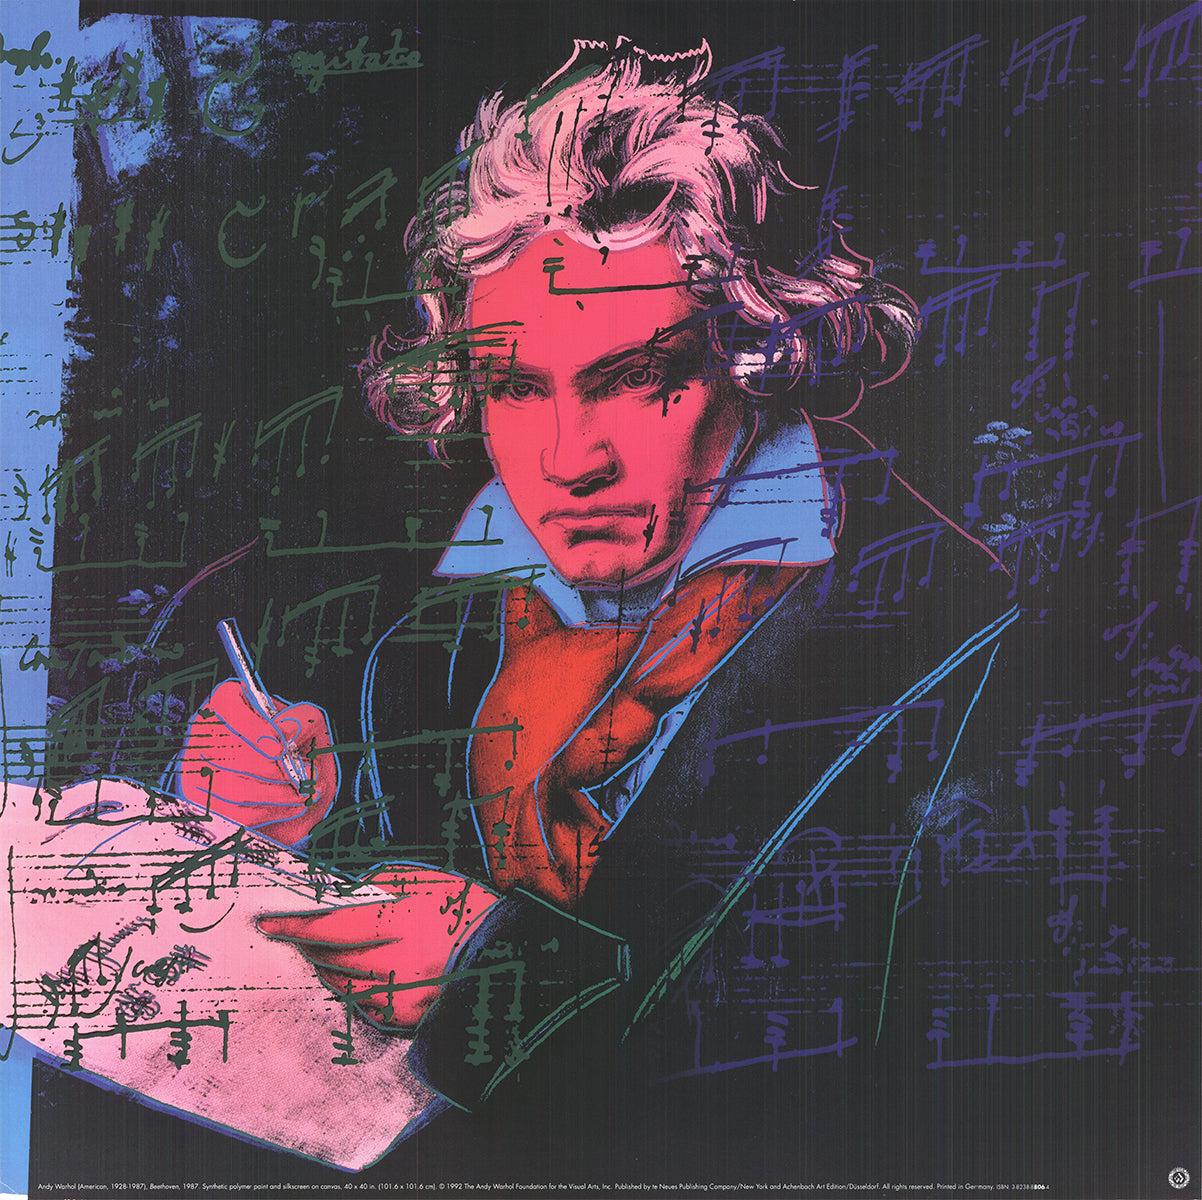 Paper Size: 23.25 x 23.25 inches ( 59.055 x 59.055 cm )
Image Size: 23.25 x 23.25 inches ( 59.055 x 59.055 cm )
Framed: No
Condition: A: Mint
Additional Details: Beethoven Pink by Andy Warhol, printed in 1992, published by Te neues Publishing in